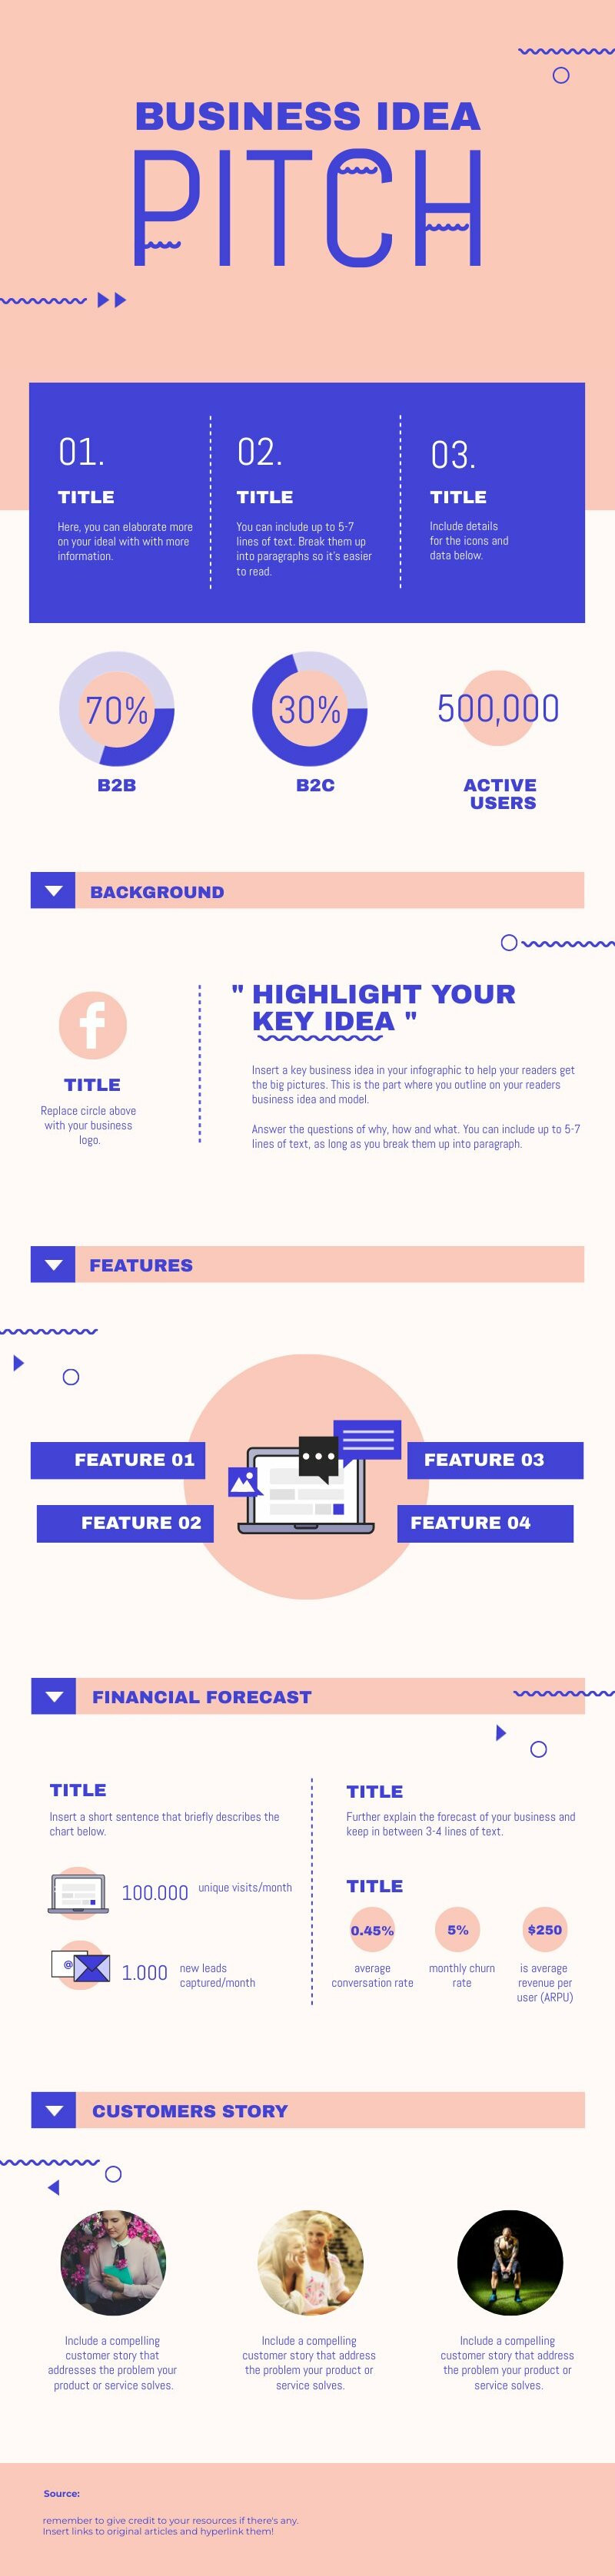 Free Infographic Template: Ideas Pitch  Piktochart Within Business Idea Pitch Template